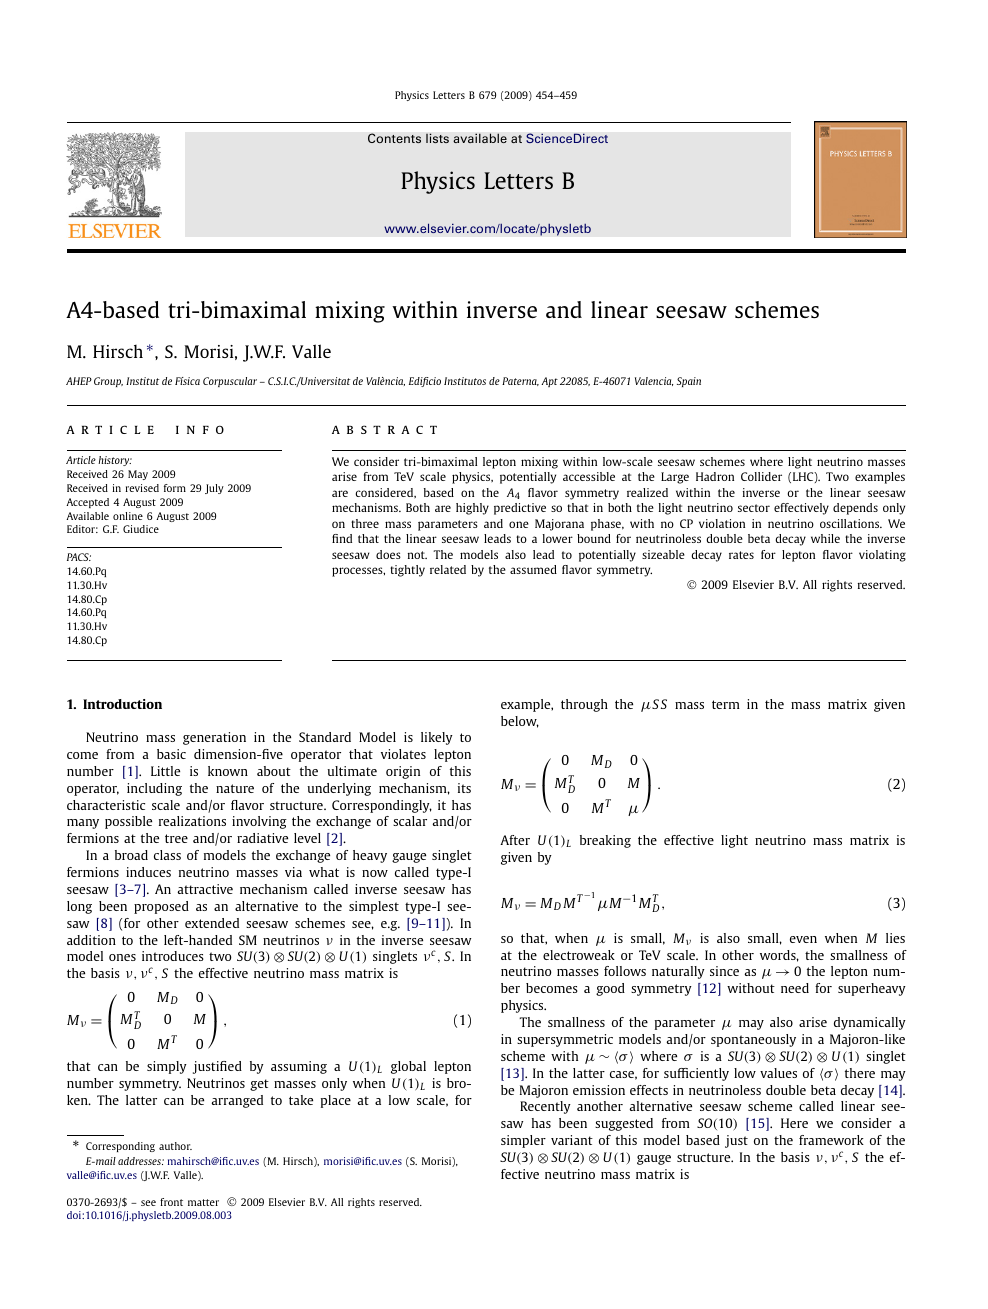 Based Tri Bimaximal Mixing Within Inverse And Linear Seesaw Schemes Topic Of Research Paper In Physical Sciences Download Scholarly Article Pdf And Read For Free On Cyberleninka Open Science Hub